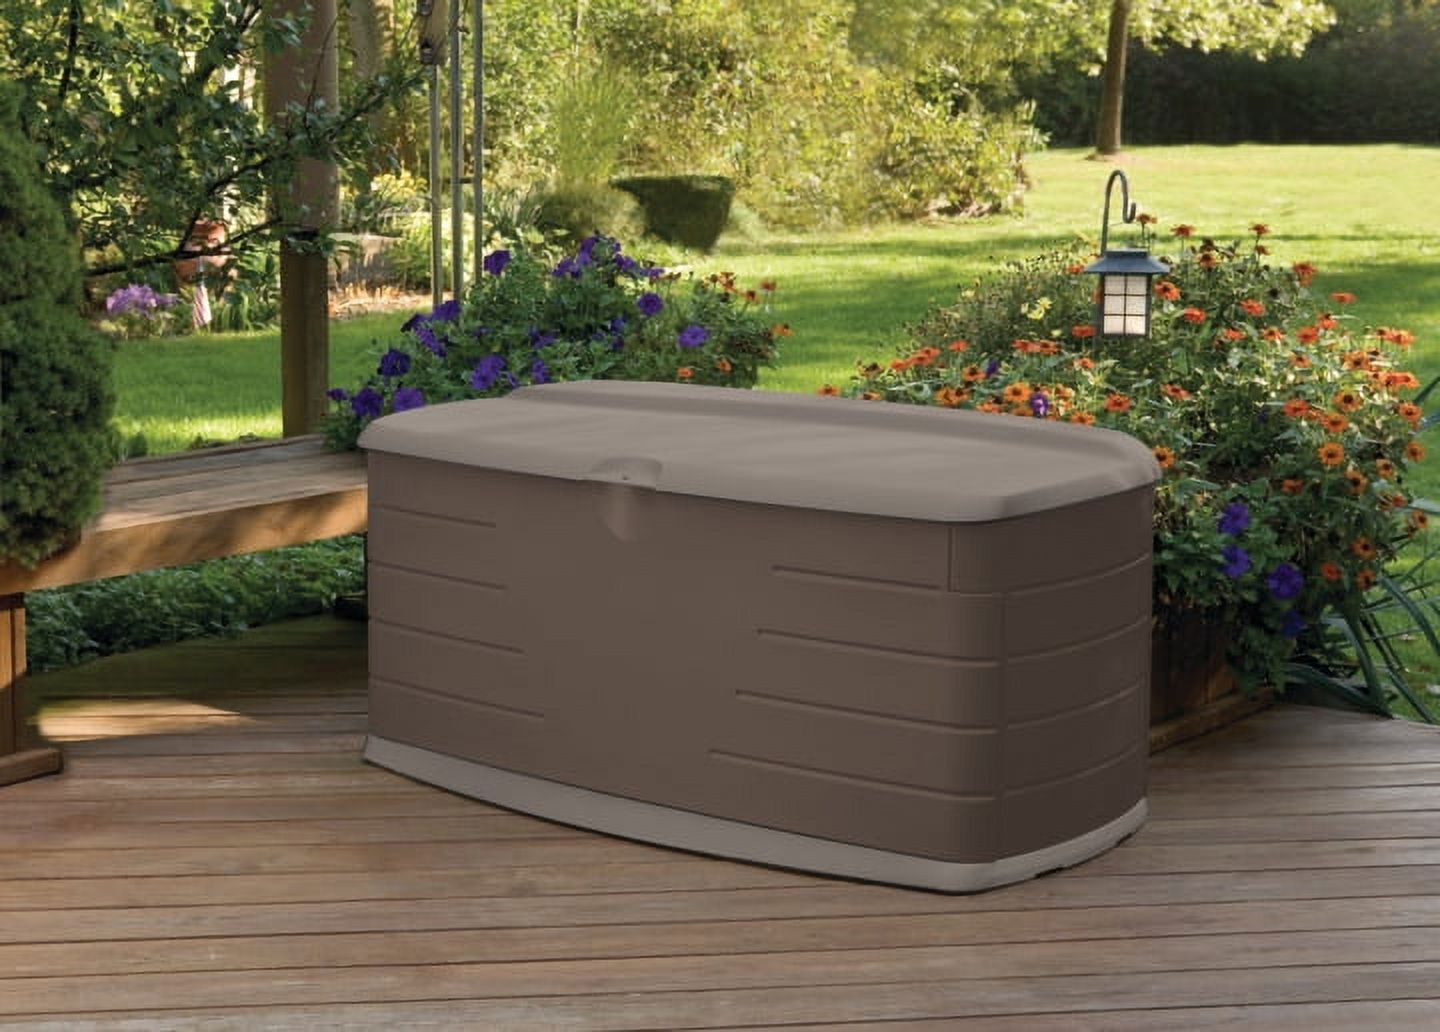 Rubbermaid Outdoor Large Deck Box with Seat, Green, 90 Gallon - image 5 of 5